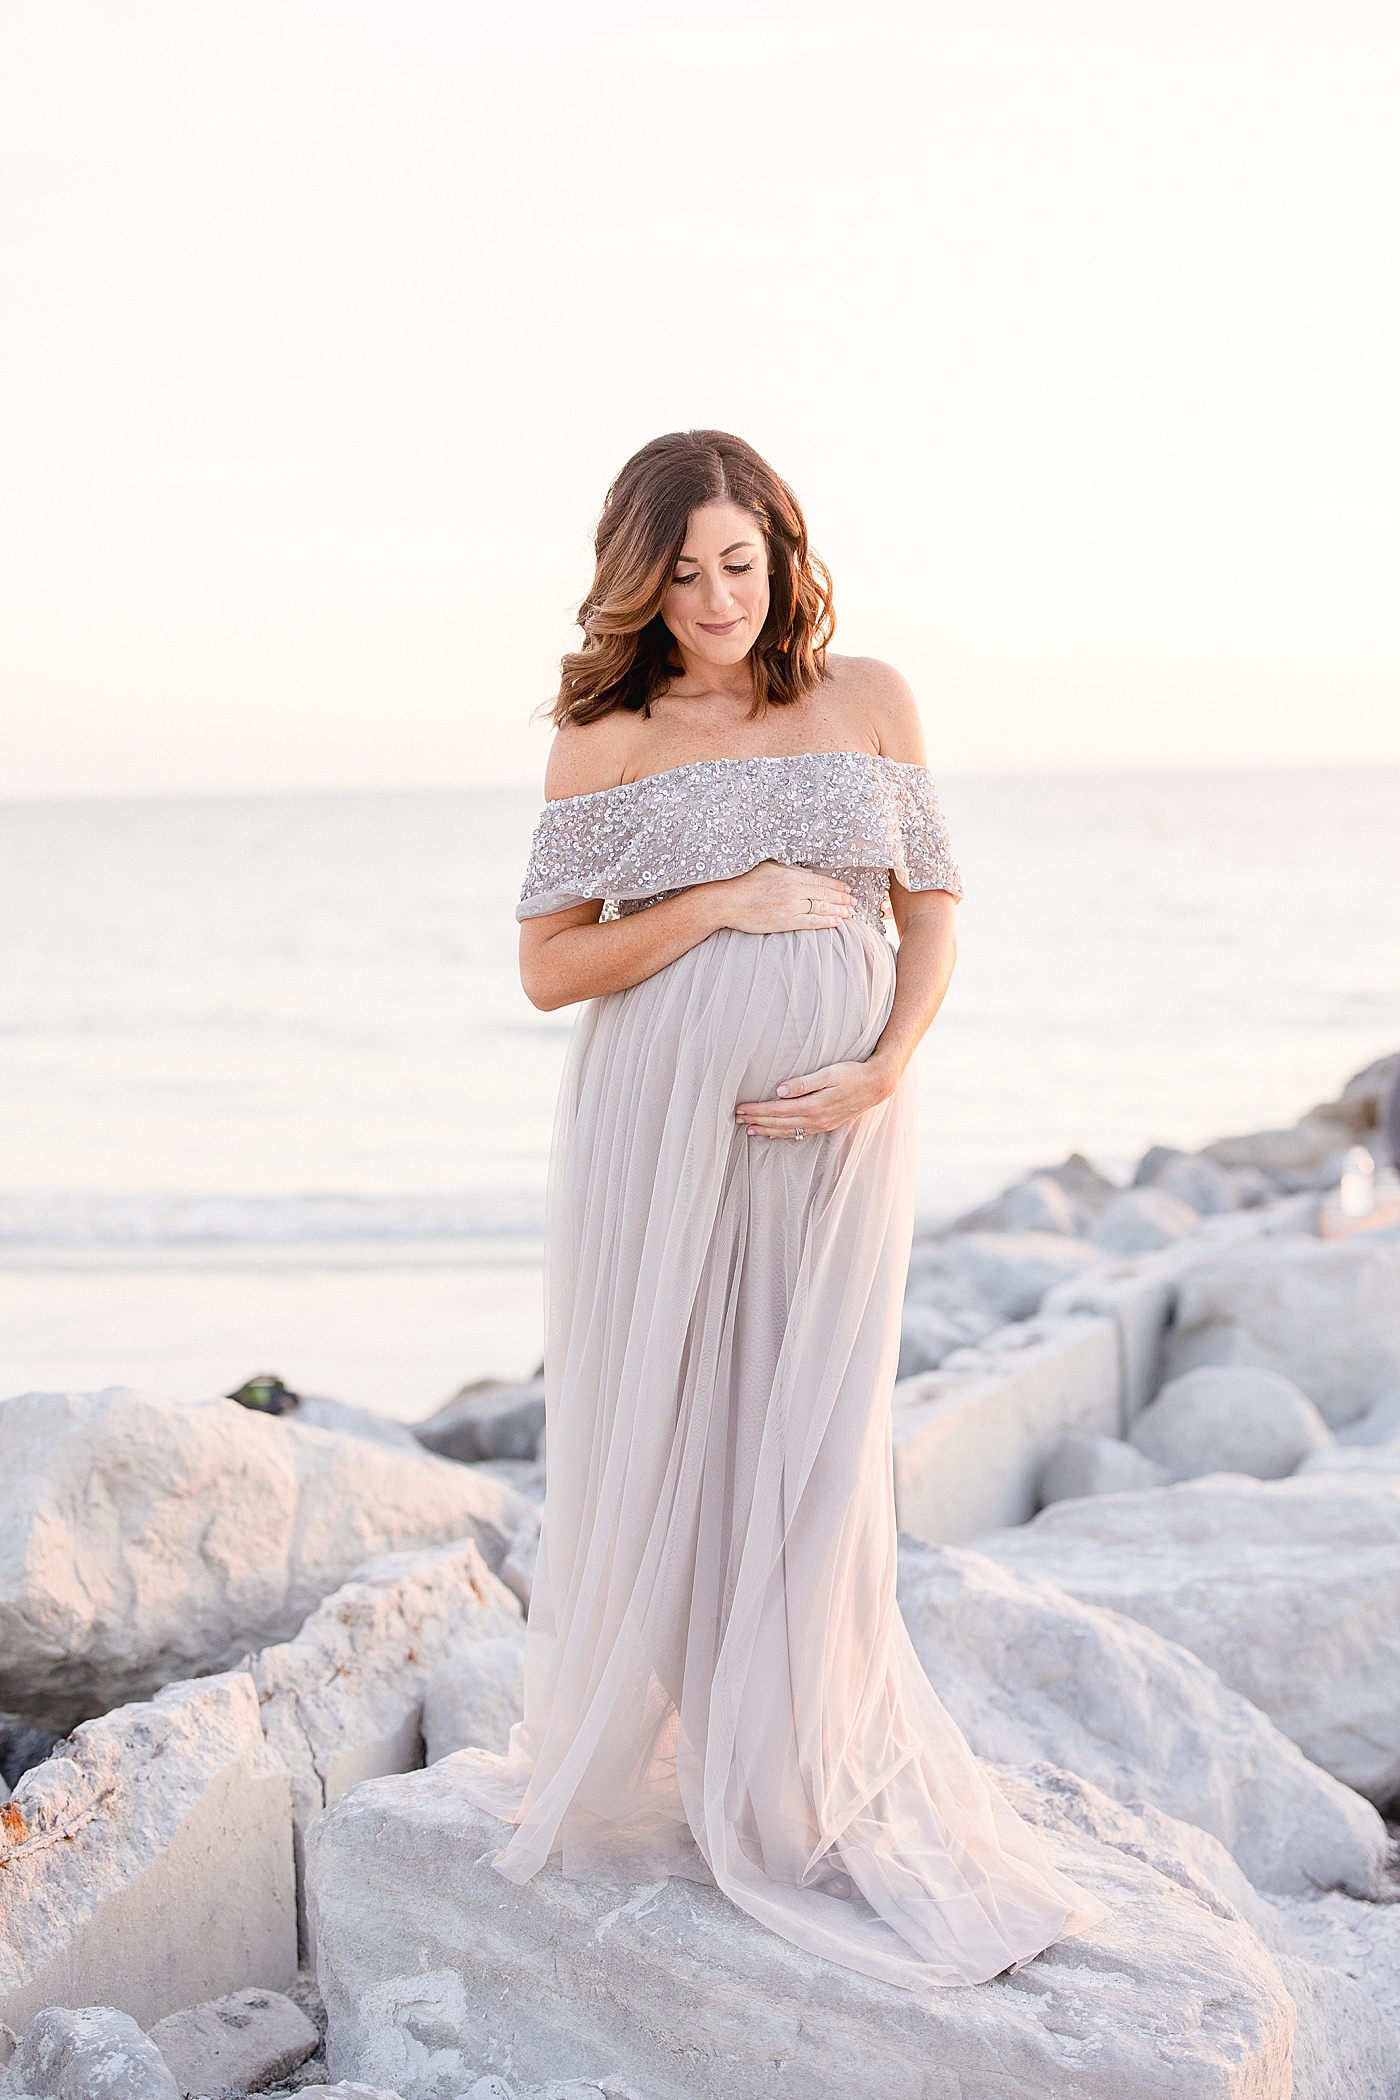 Mom standing on rocks at maternity session. Photo by Brittany Elise Photography.